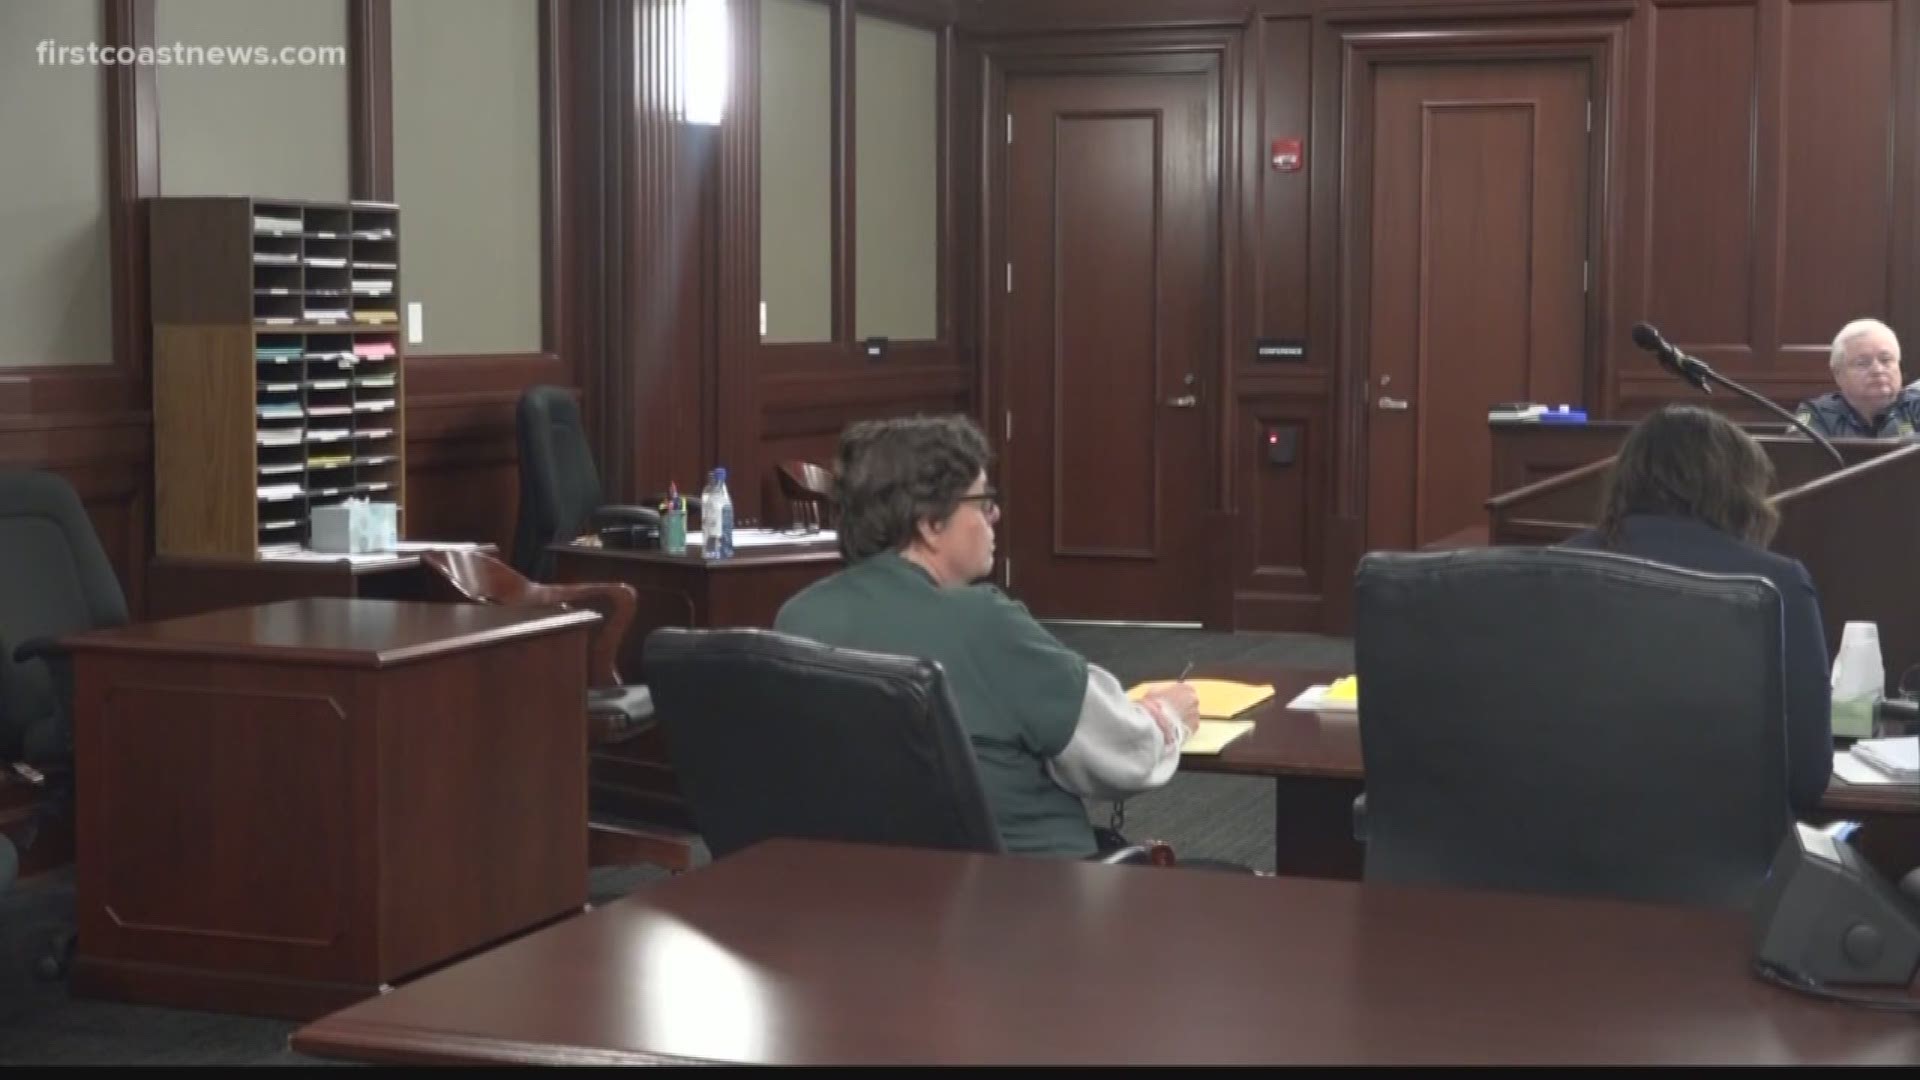 In a pre-trial hearing, two witnesses take the stand identifying Ronnie Hyde as their abuser over 20 years ago.